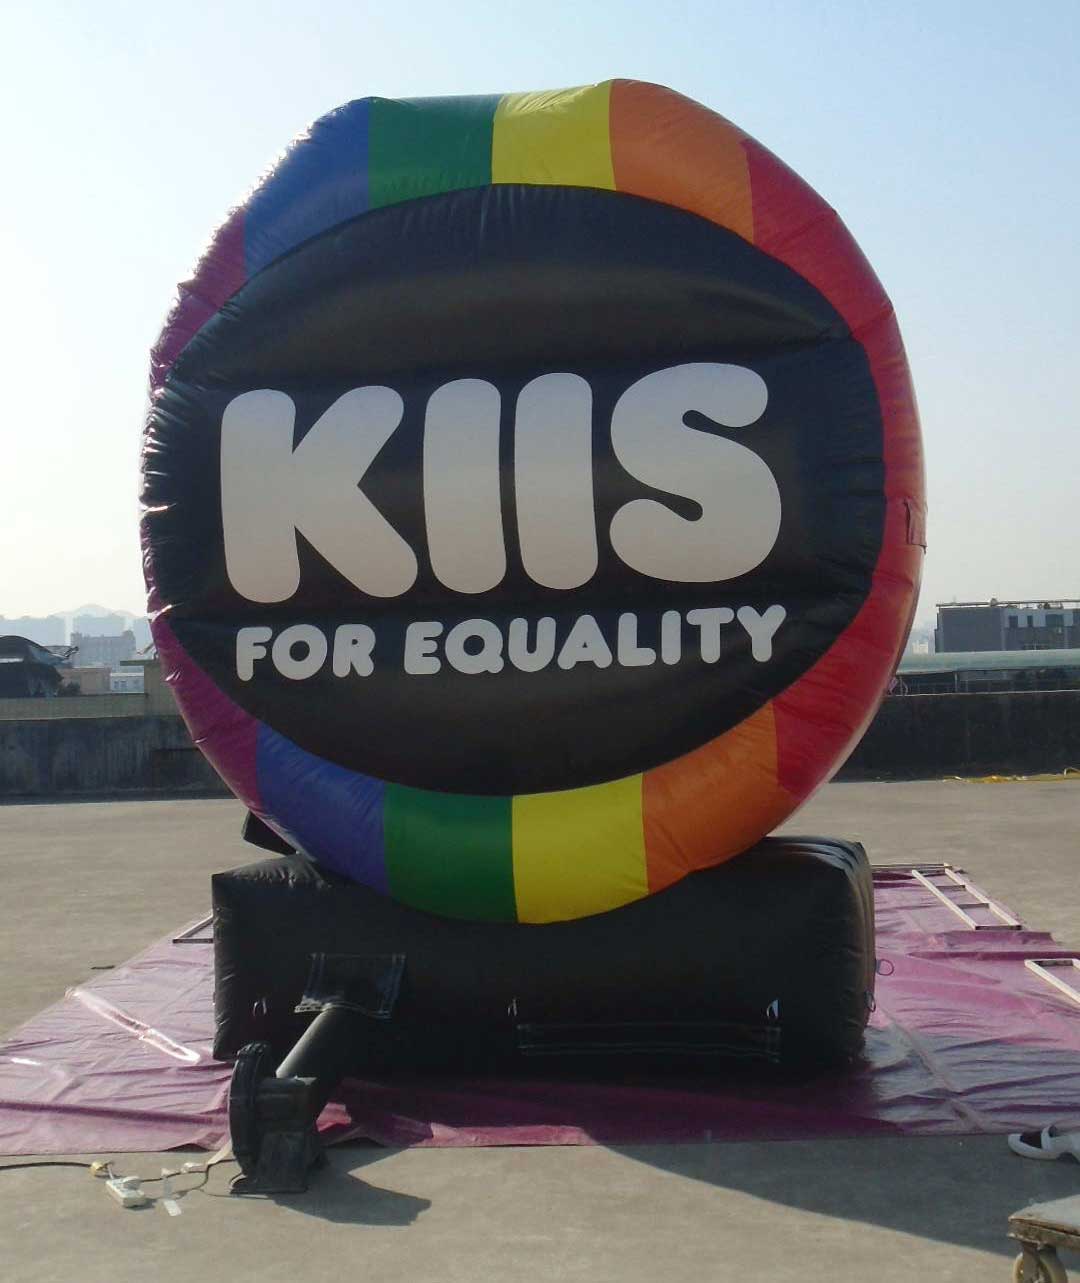 The KIIS inflatable is large enough when inflated to rise above a crowd and be seen from a distance while remaining portable and transport friendly.